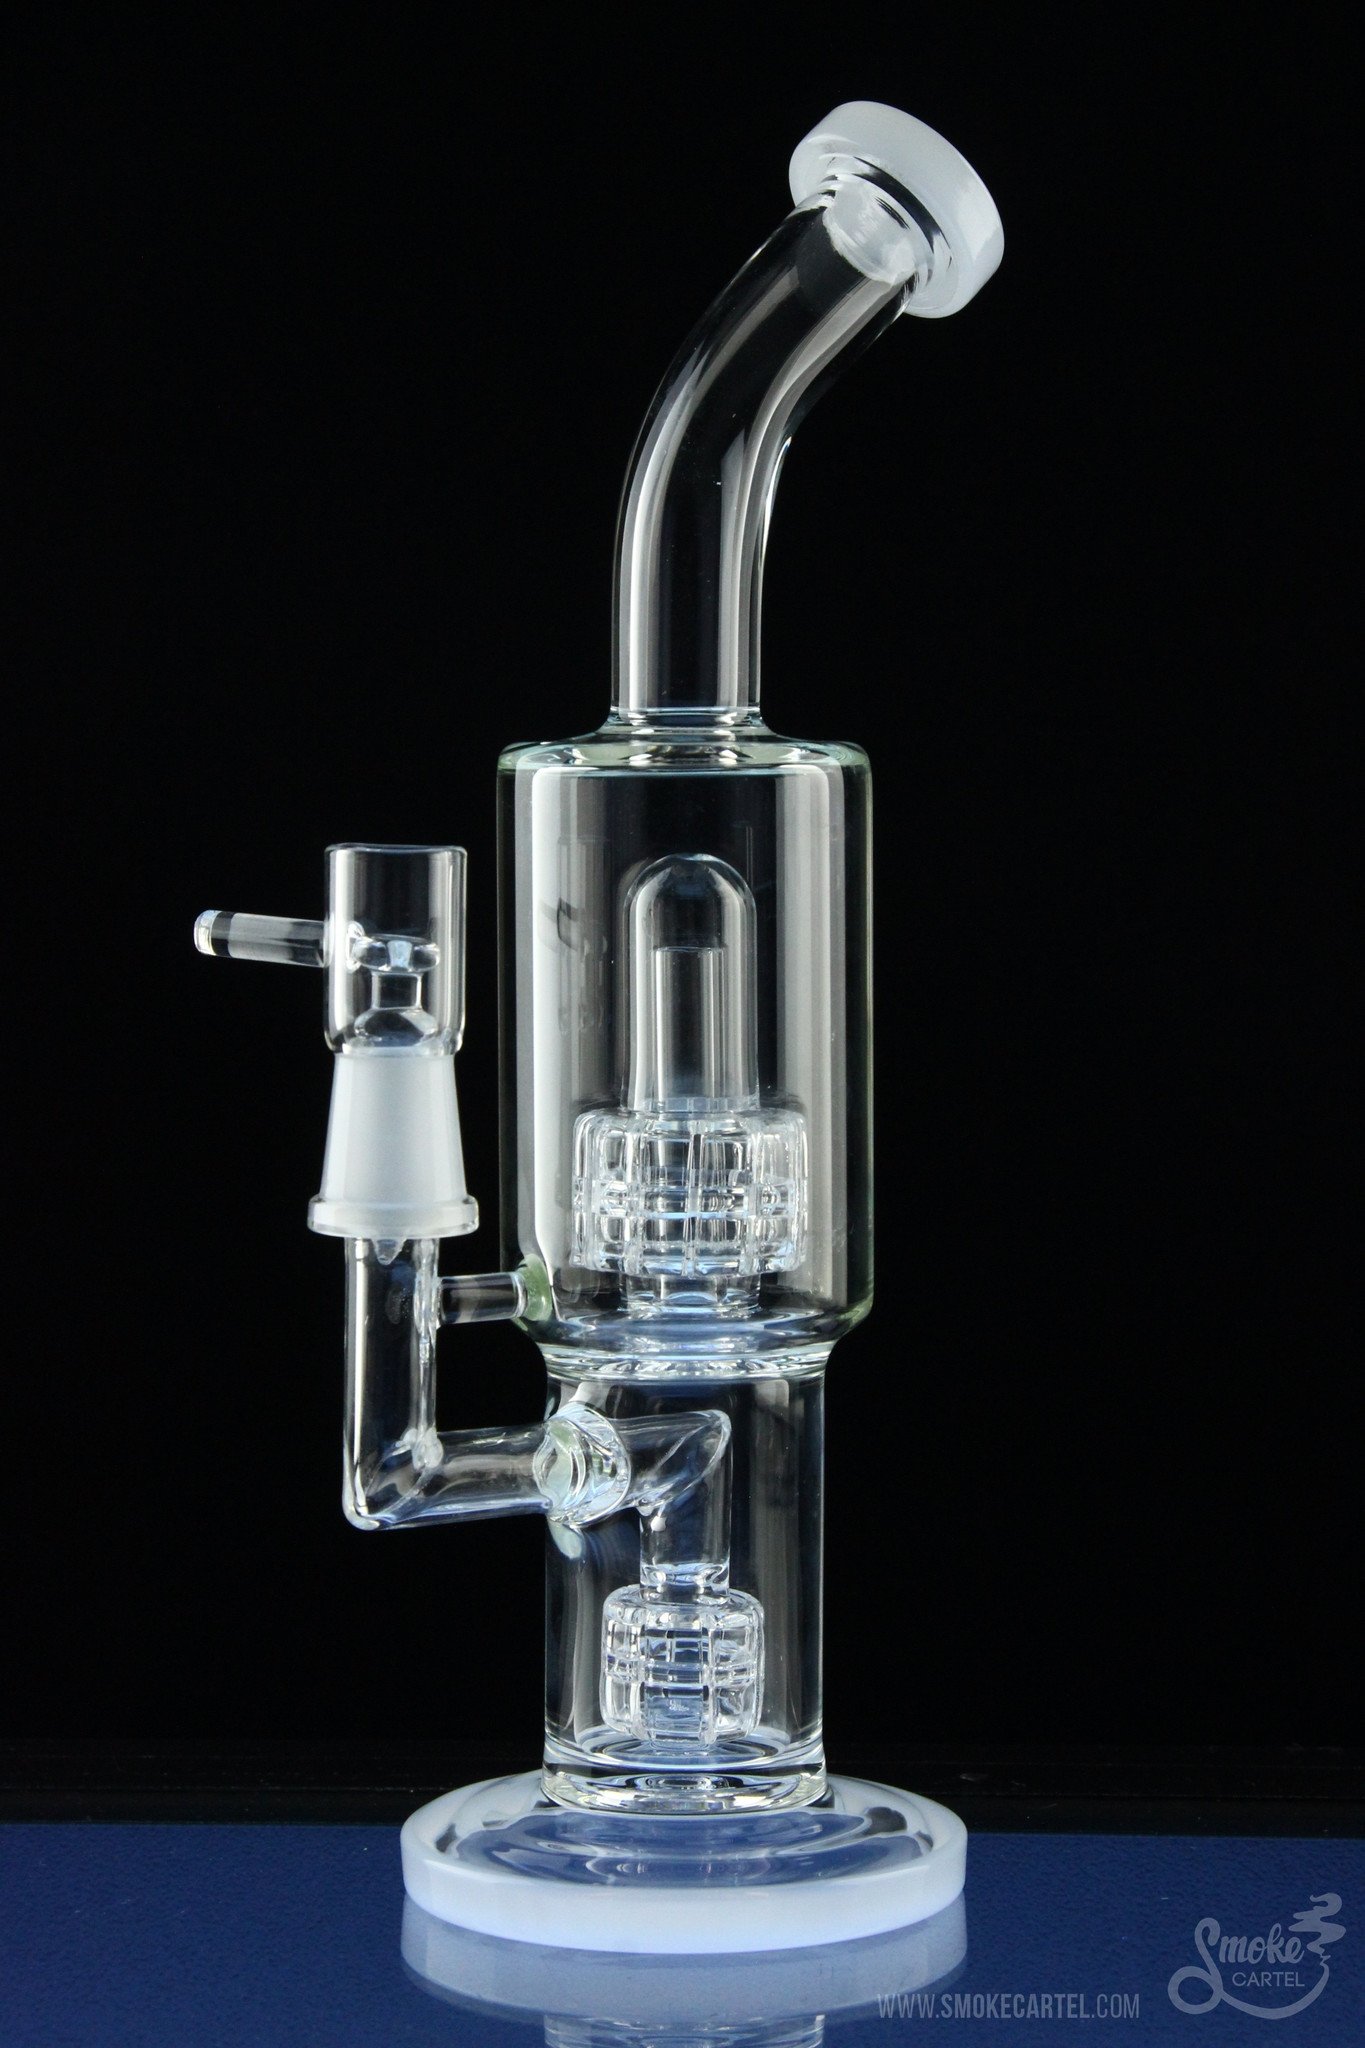 “The Avalanche” Dab Rig – Half Price 50% off now!